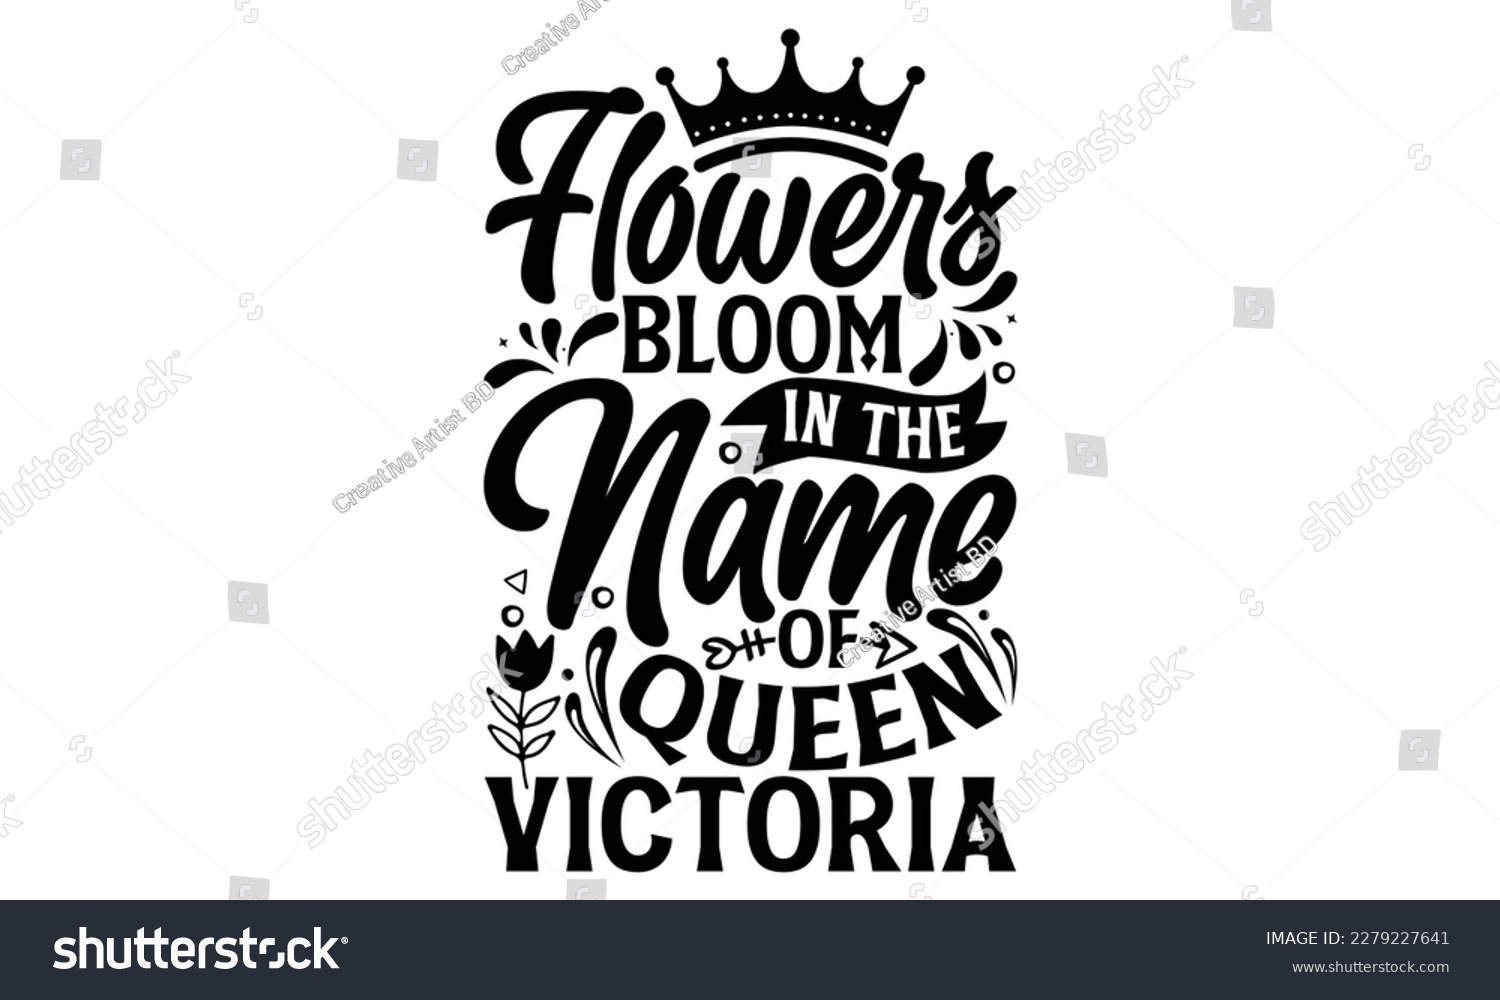 SVG of Flowers Bloom In The Name Of Queen Victoria - Victoria Day T Shirt Design, Hand lettering illustration for your design, svg cut file, svg file, Modern, simple, lettering. svg